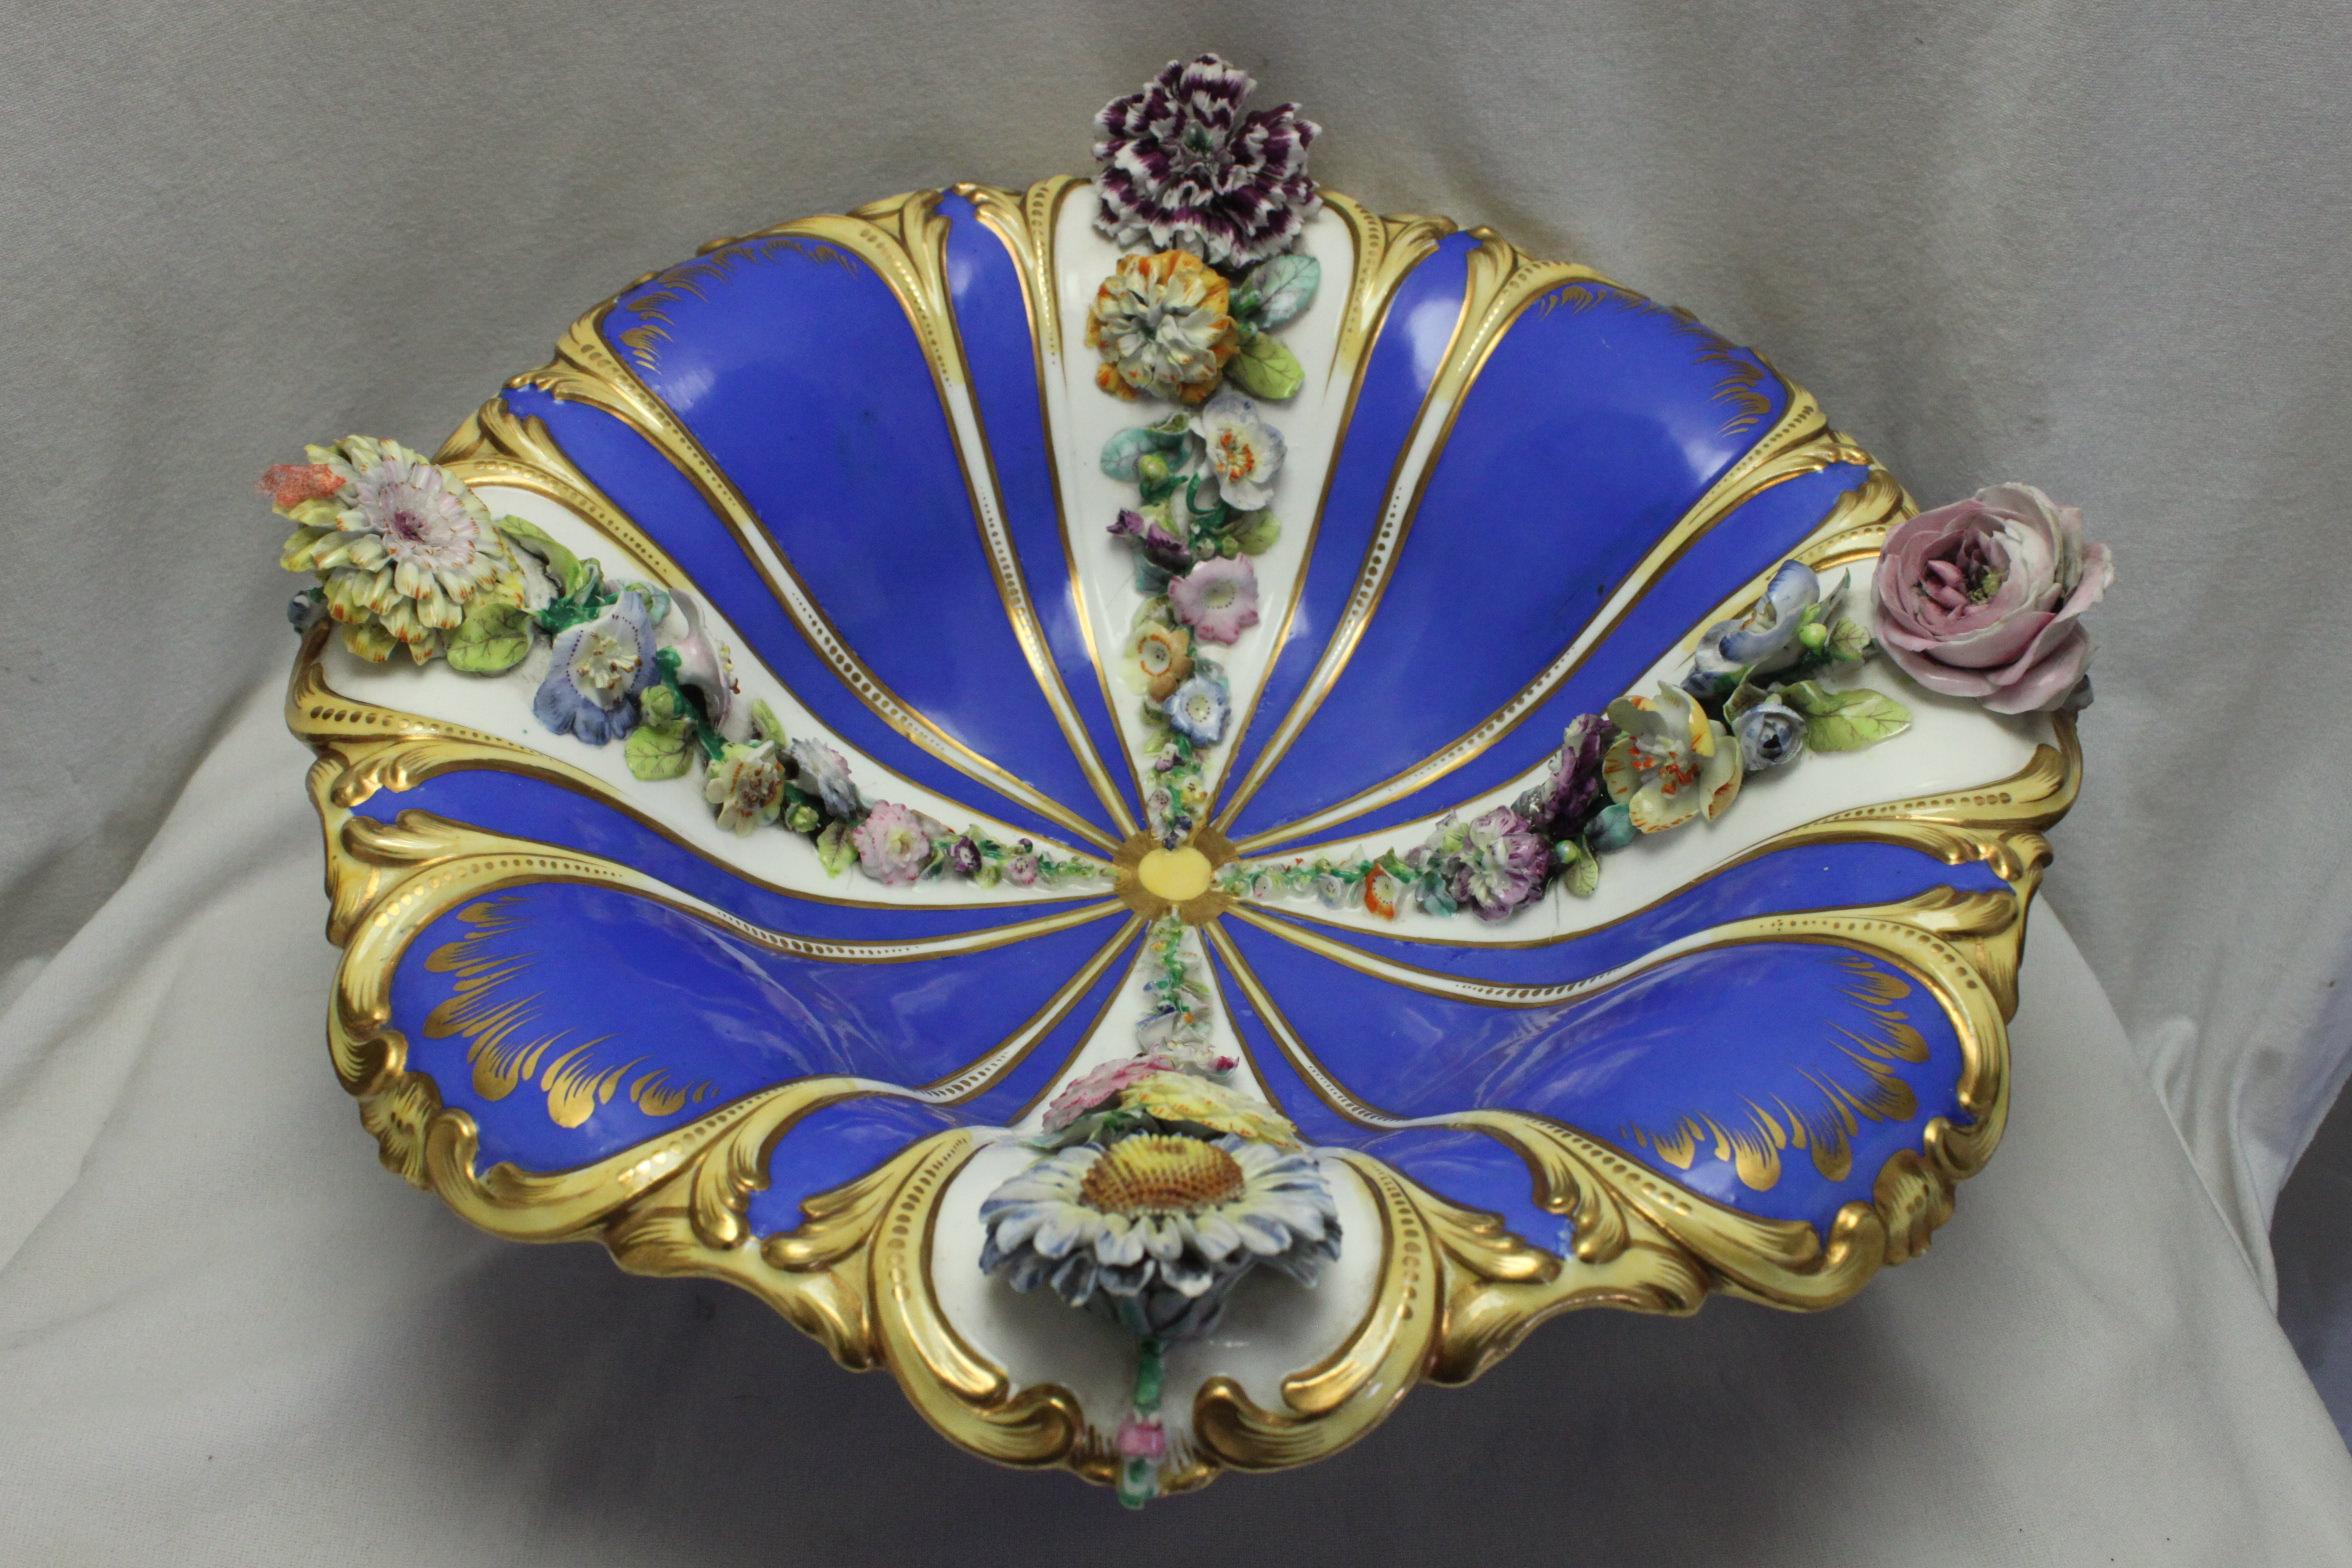 This flower encrusted ornamental bowl is attributed to Coalport. It is decorated with four lines of hand crafted flowers on the white body. These lines decrease in size towards the centre. Between each line the bowl is decorated with a ground of